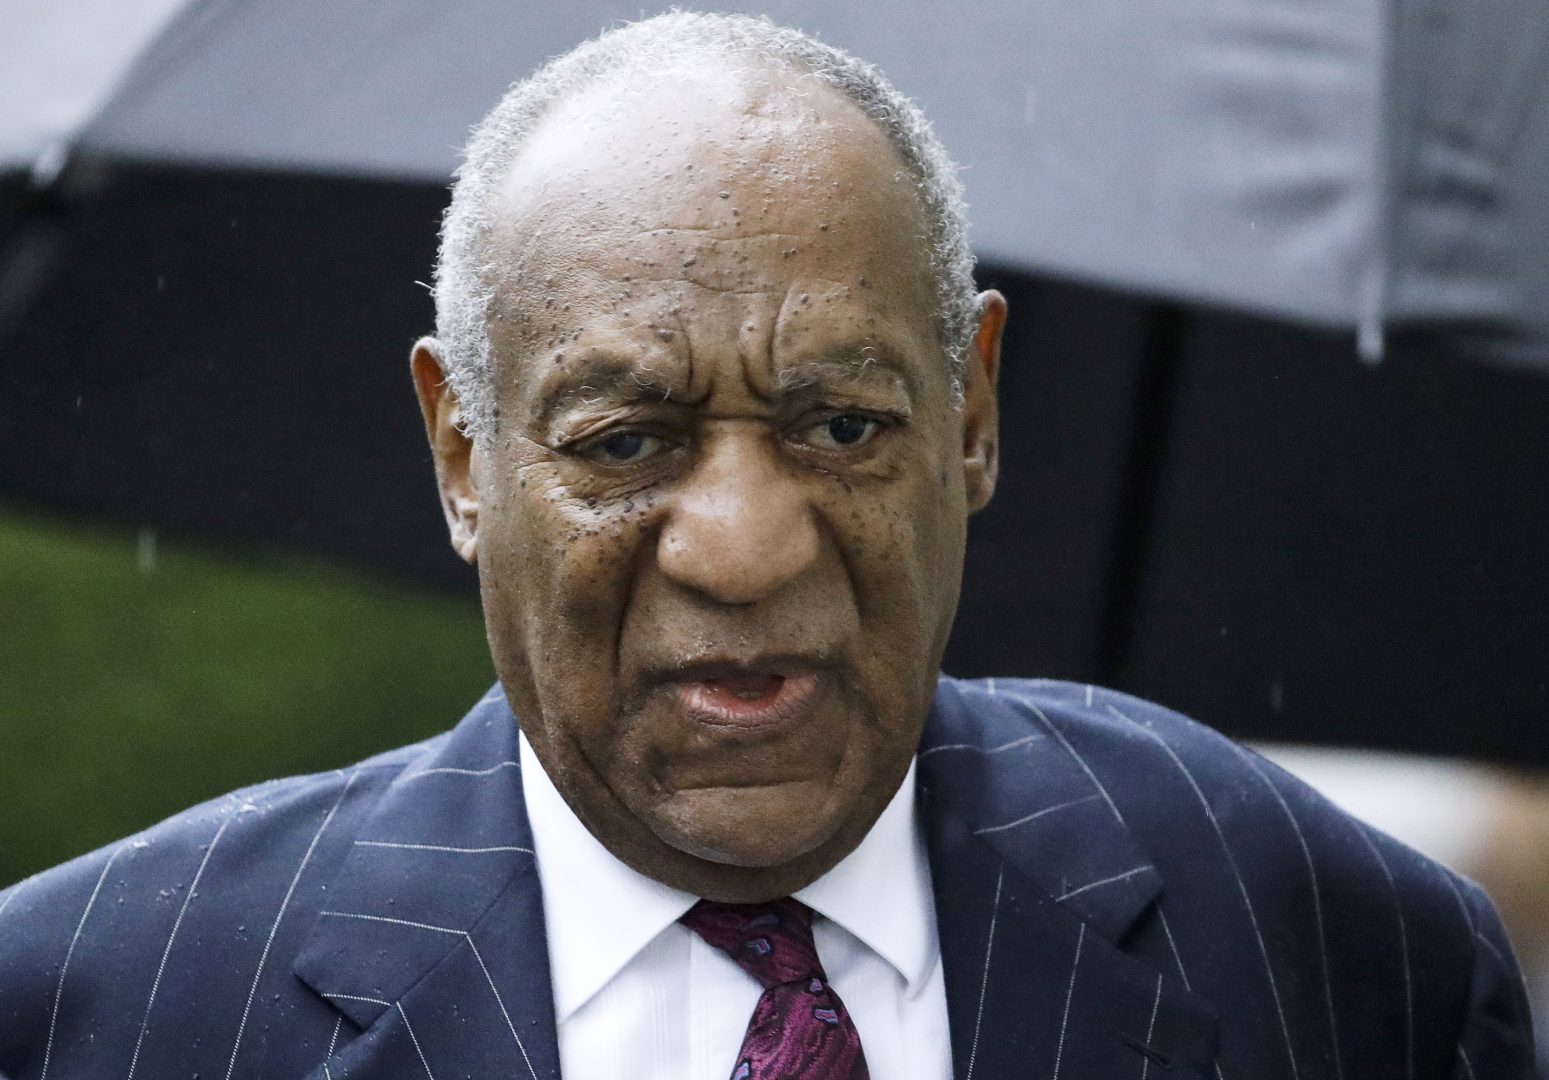 FILE - In this Sept. 25, 2018, file photo, Bill Cosby arrives for a sentencing hearing following his sexual assault conviction at the Montgomery County Courthouse in Norristown Pa. 